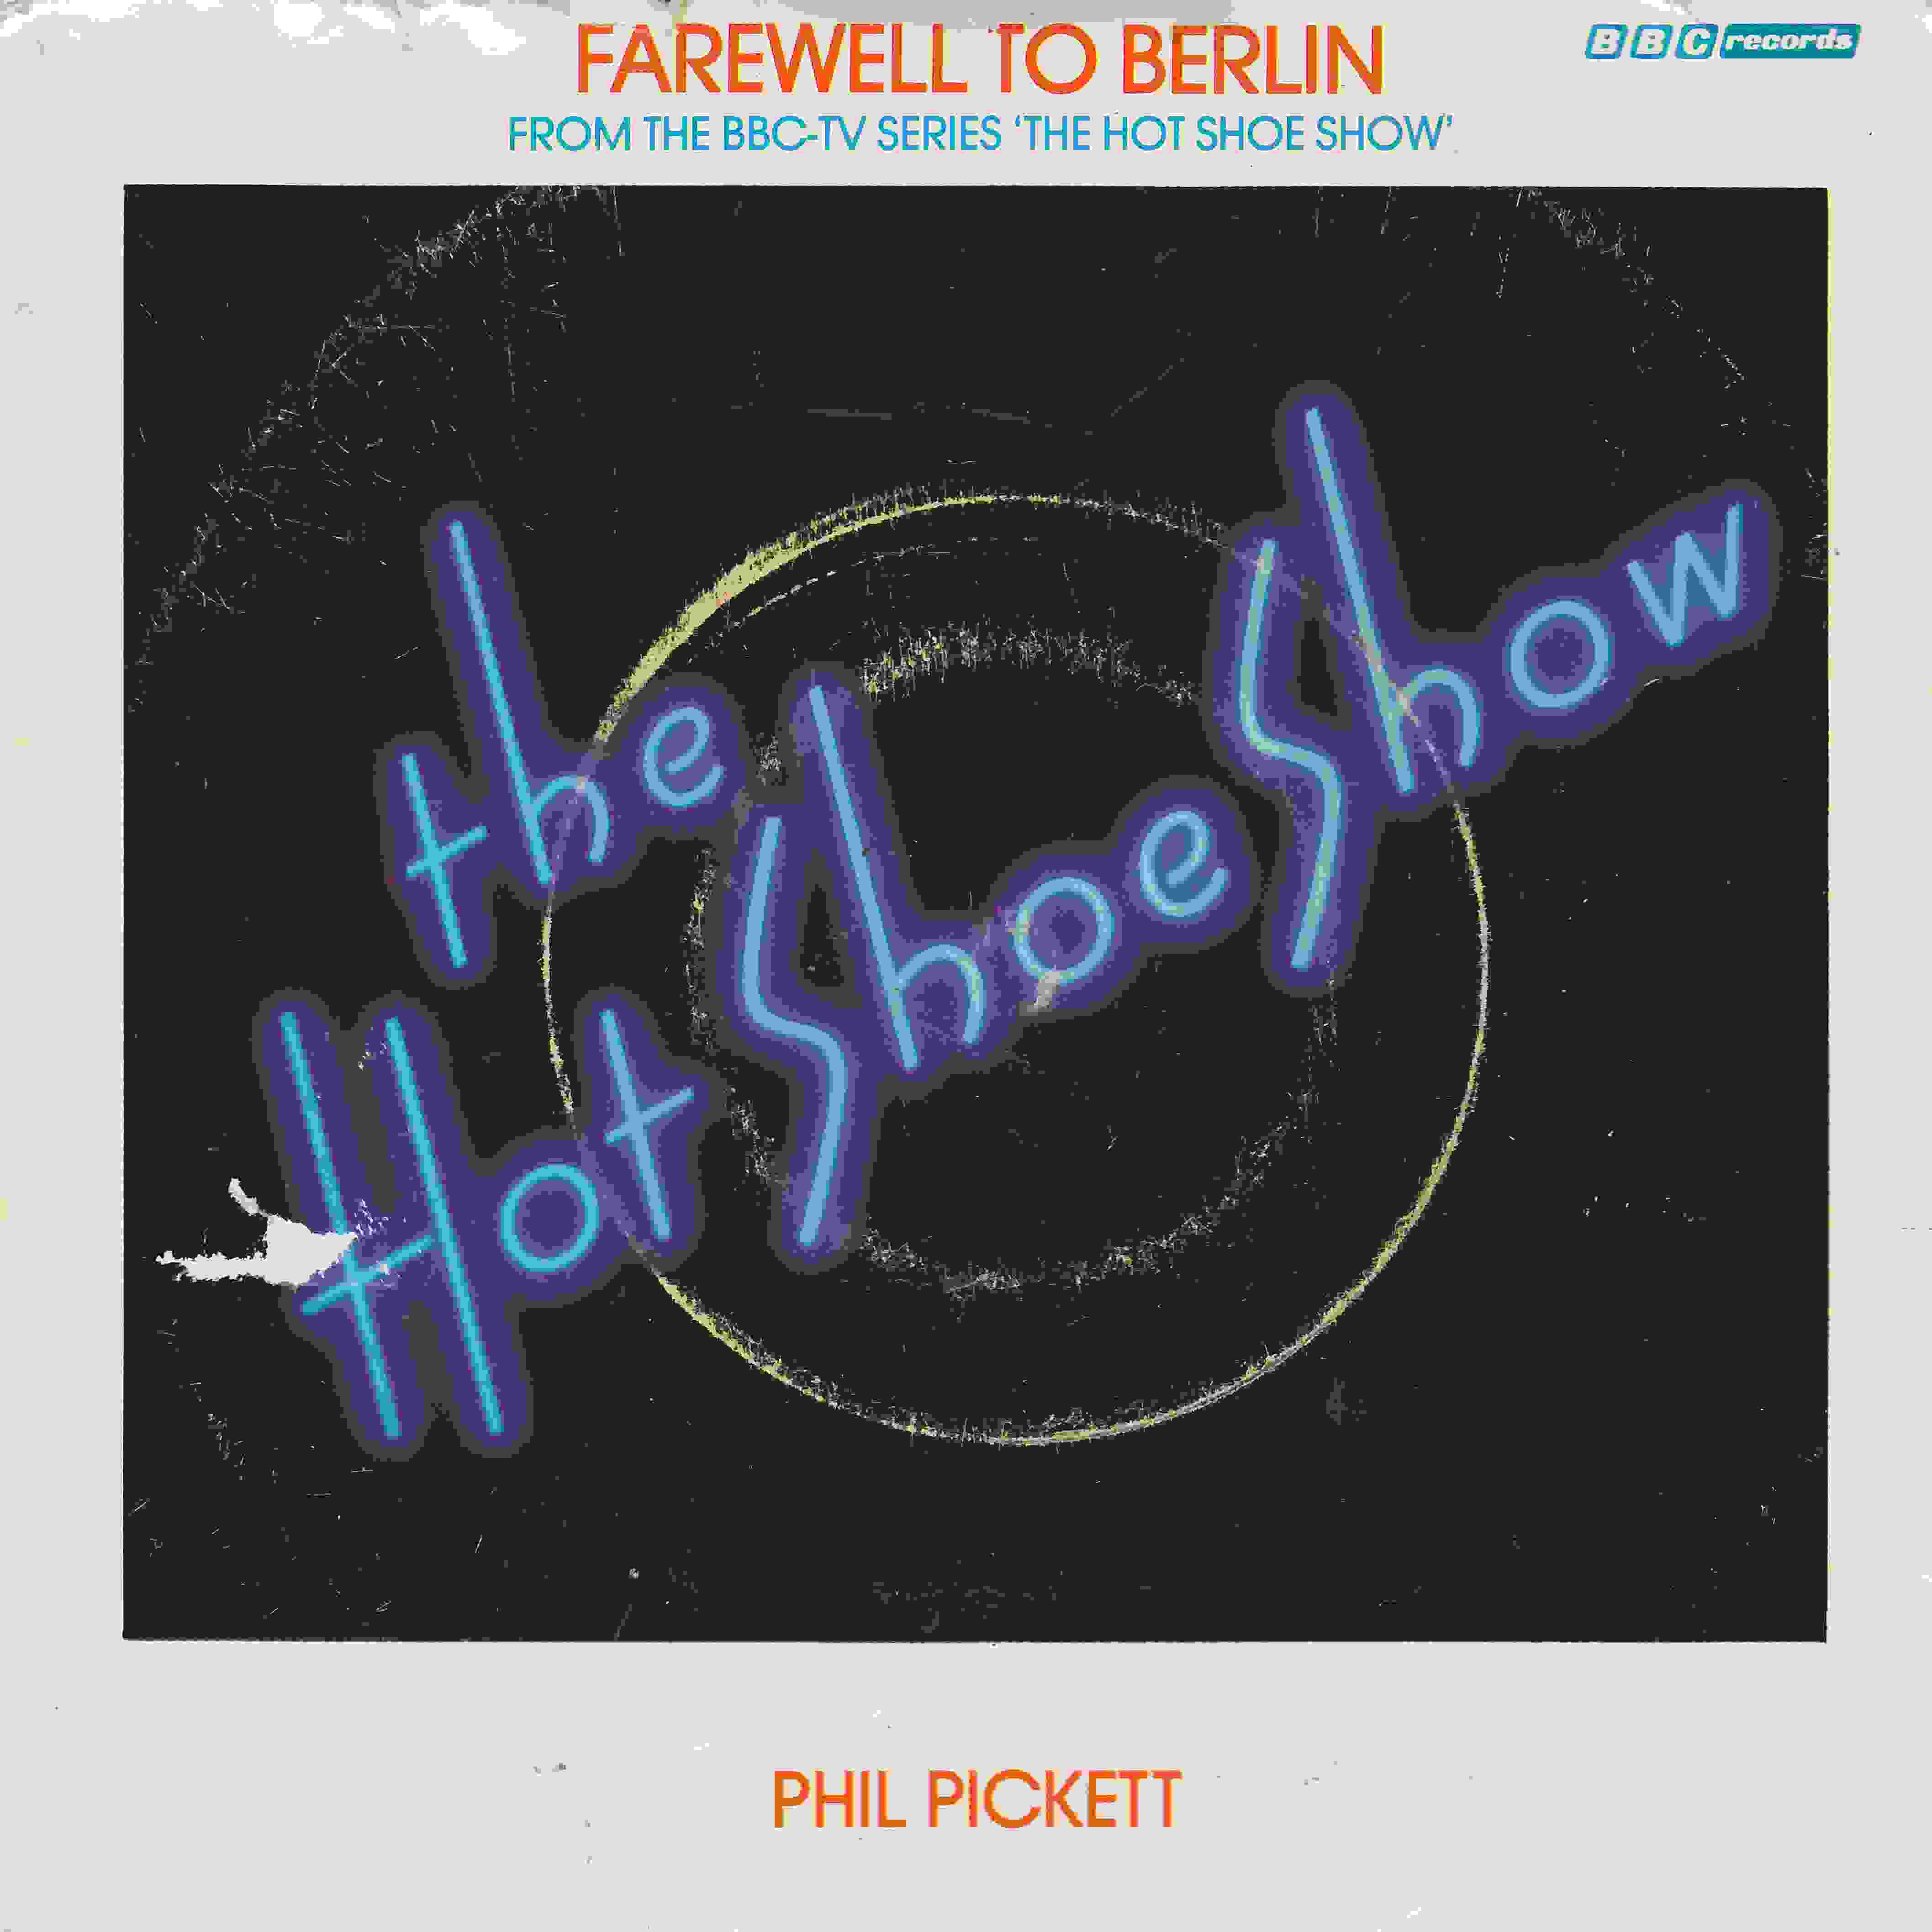 Picture of RESL 133 Farewell to Berlin (The hot shoe show) by artist Phil Pickett from the BBC singles - Records and Tapes library